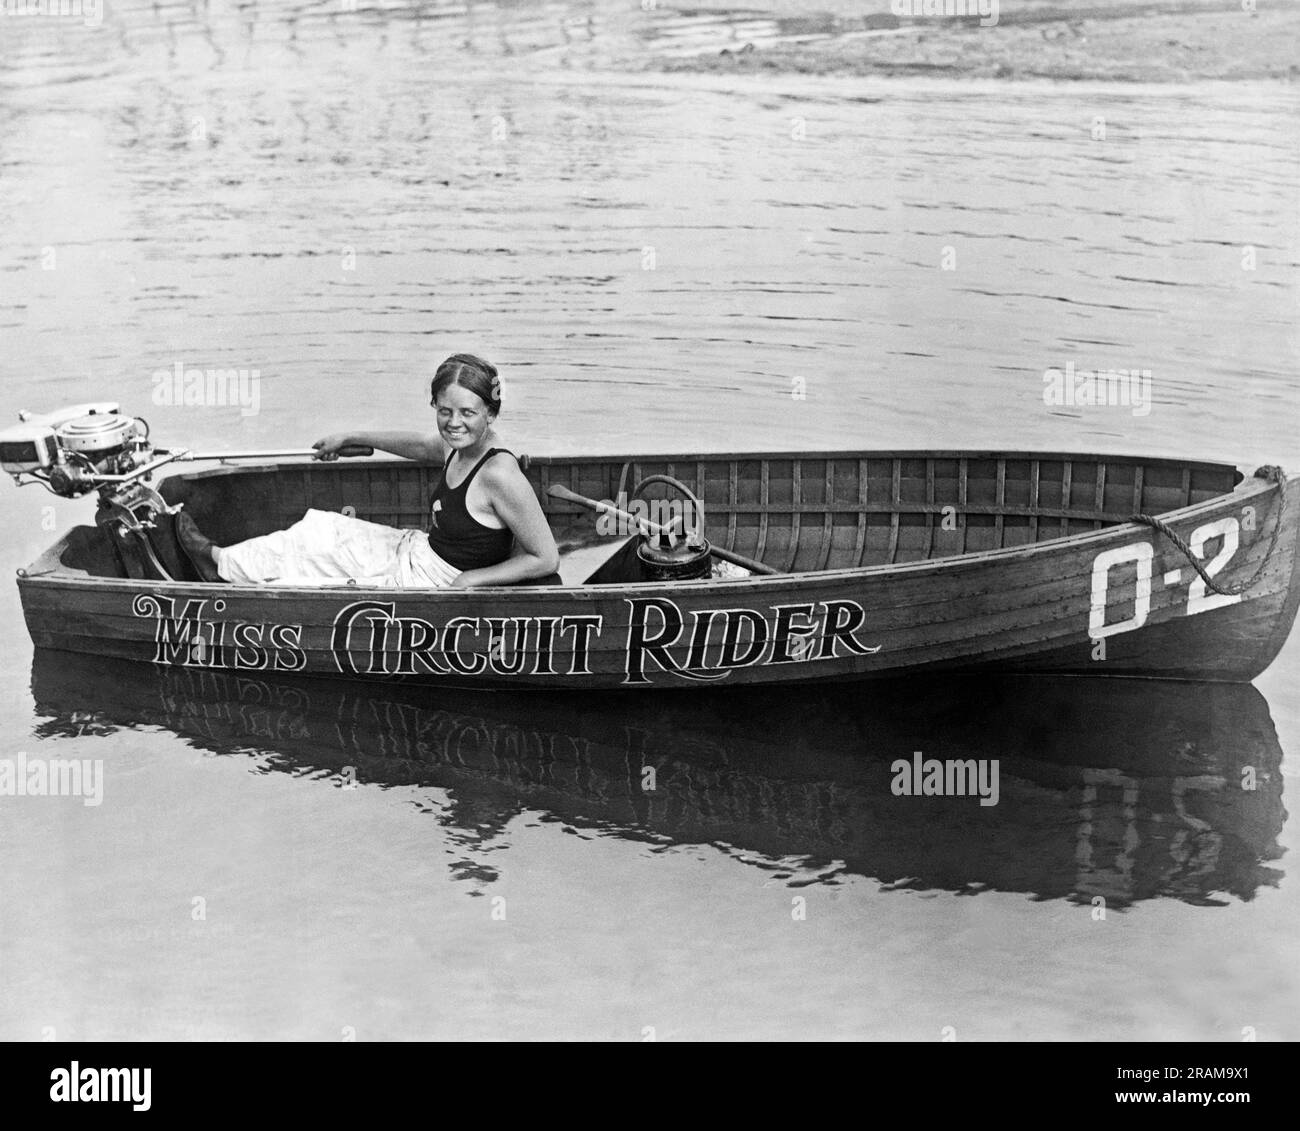 New York, New York:  September 15, 1927. Miss Circuit Rider, Helen Hentschel of Whitestone in Queens will participate when the fastest speedboats in the country race in the President's Cup on the Potomac River. Stock Photo